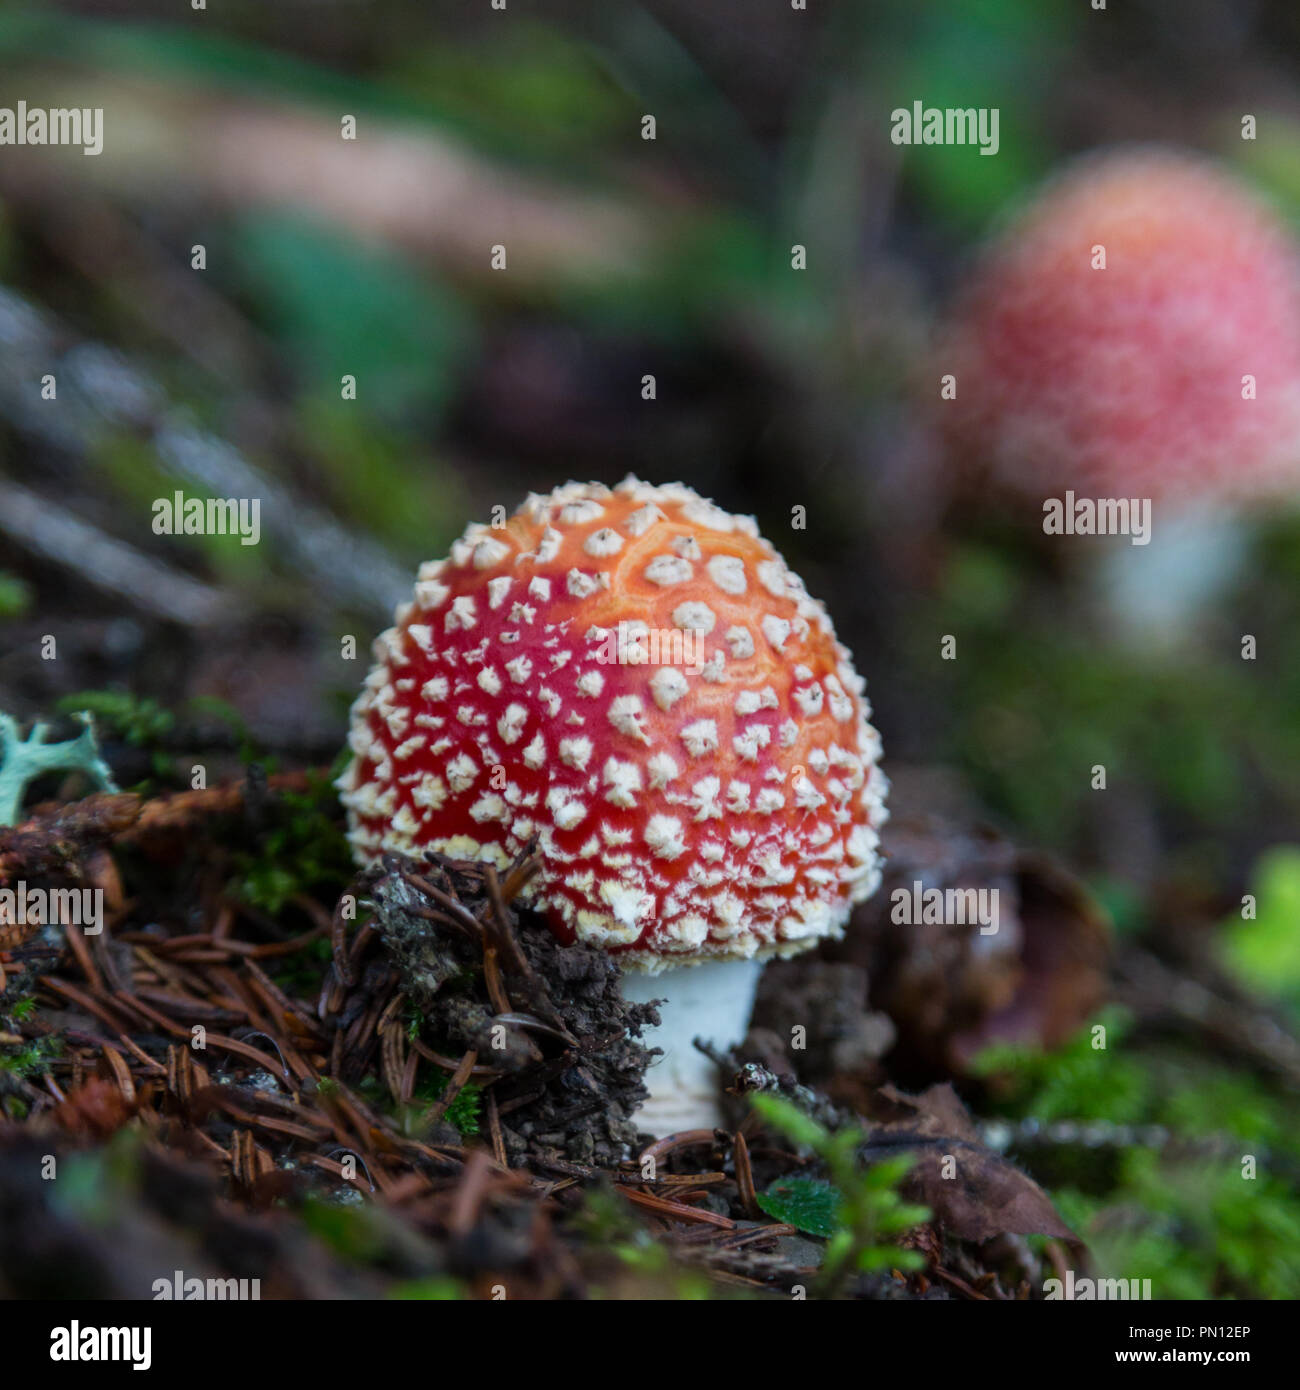 two fly-agaric mushrooms on natural ground Stock Photo